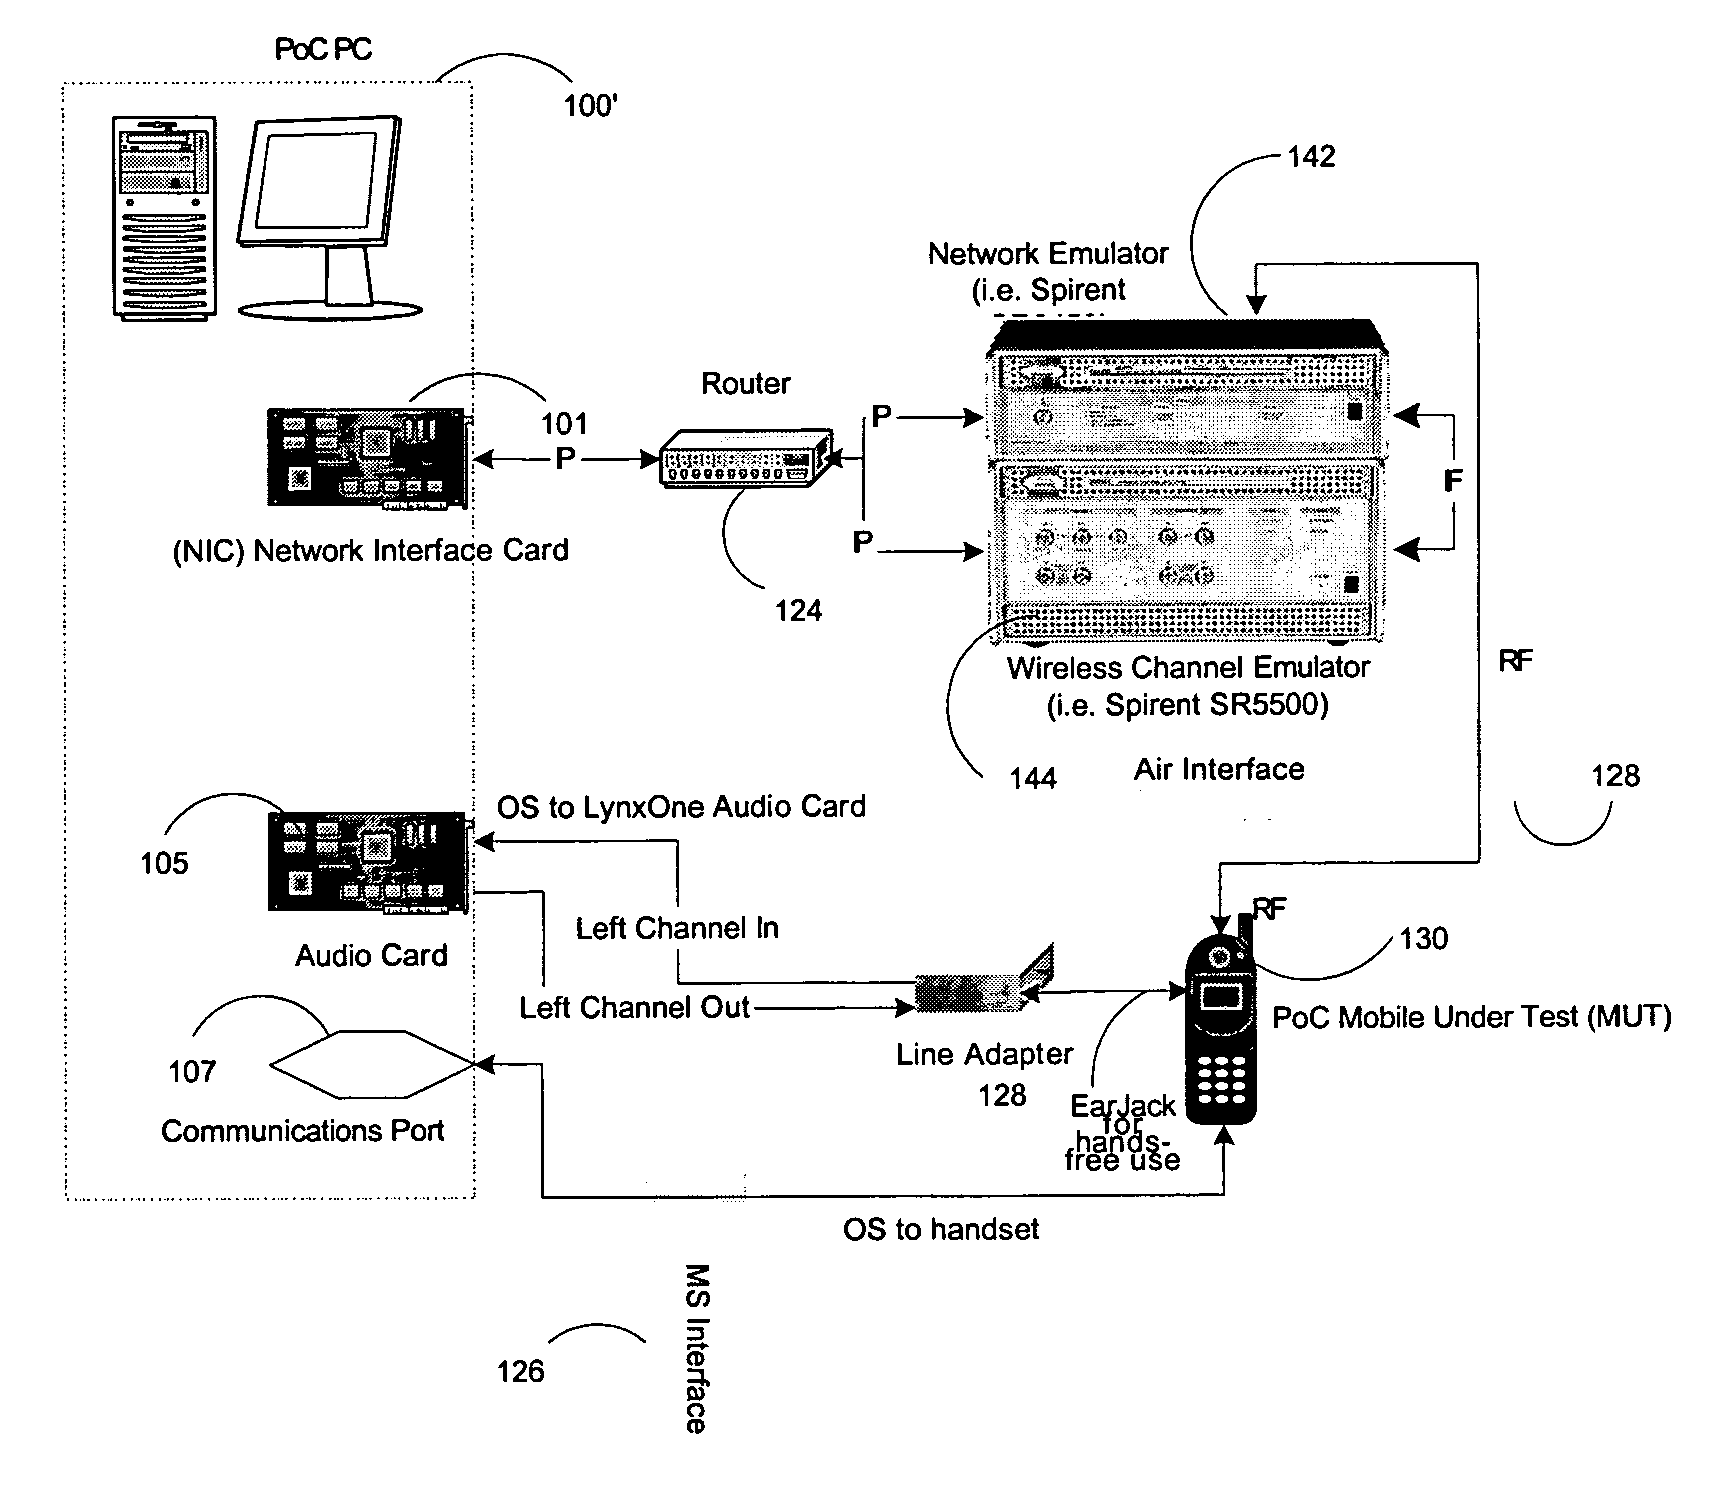 System and method for testing a packet data communications device